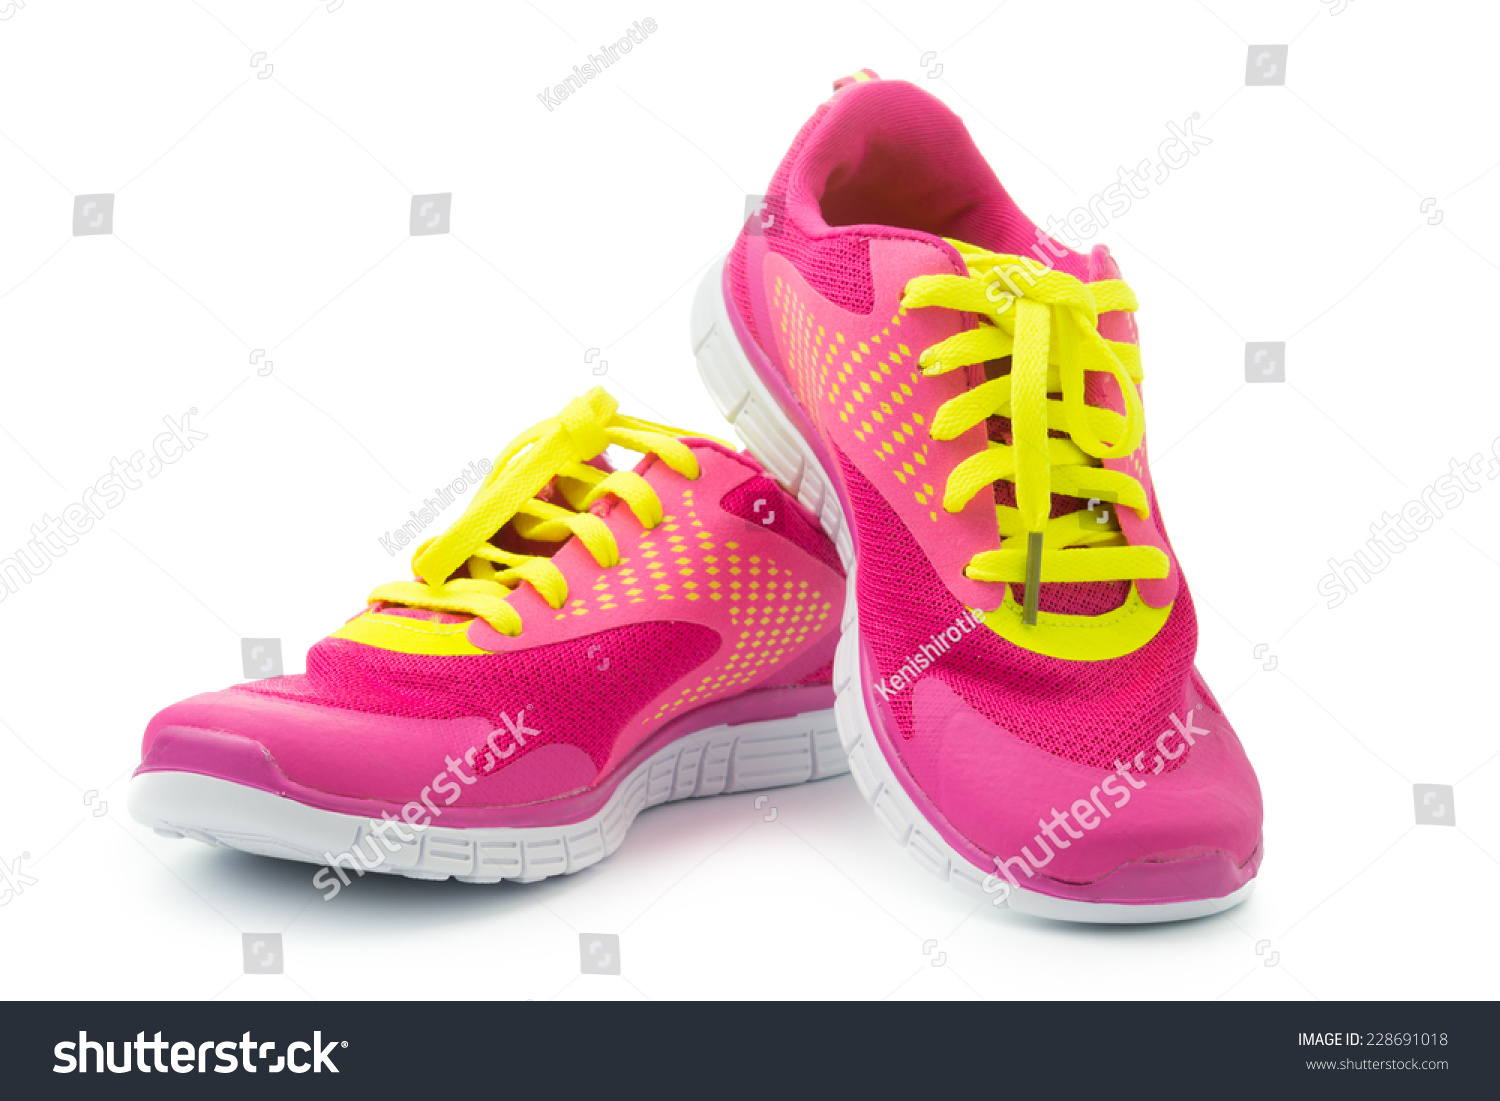 270,399 Running shoes Stock Photos, Images & Photography | Shutterstock